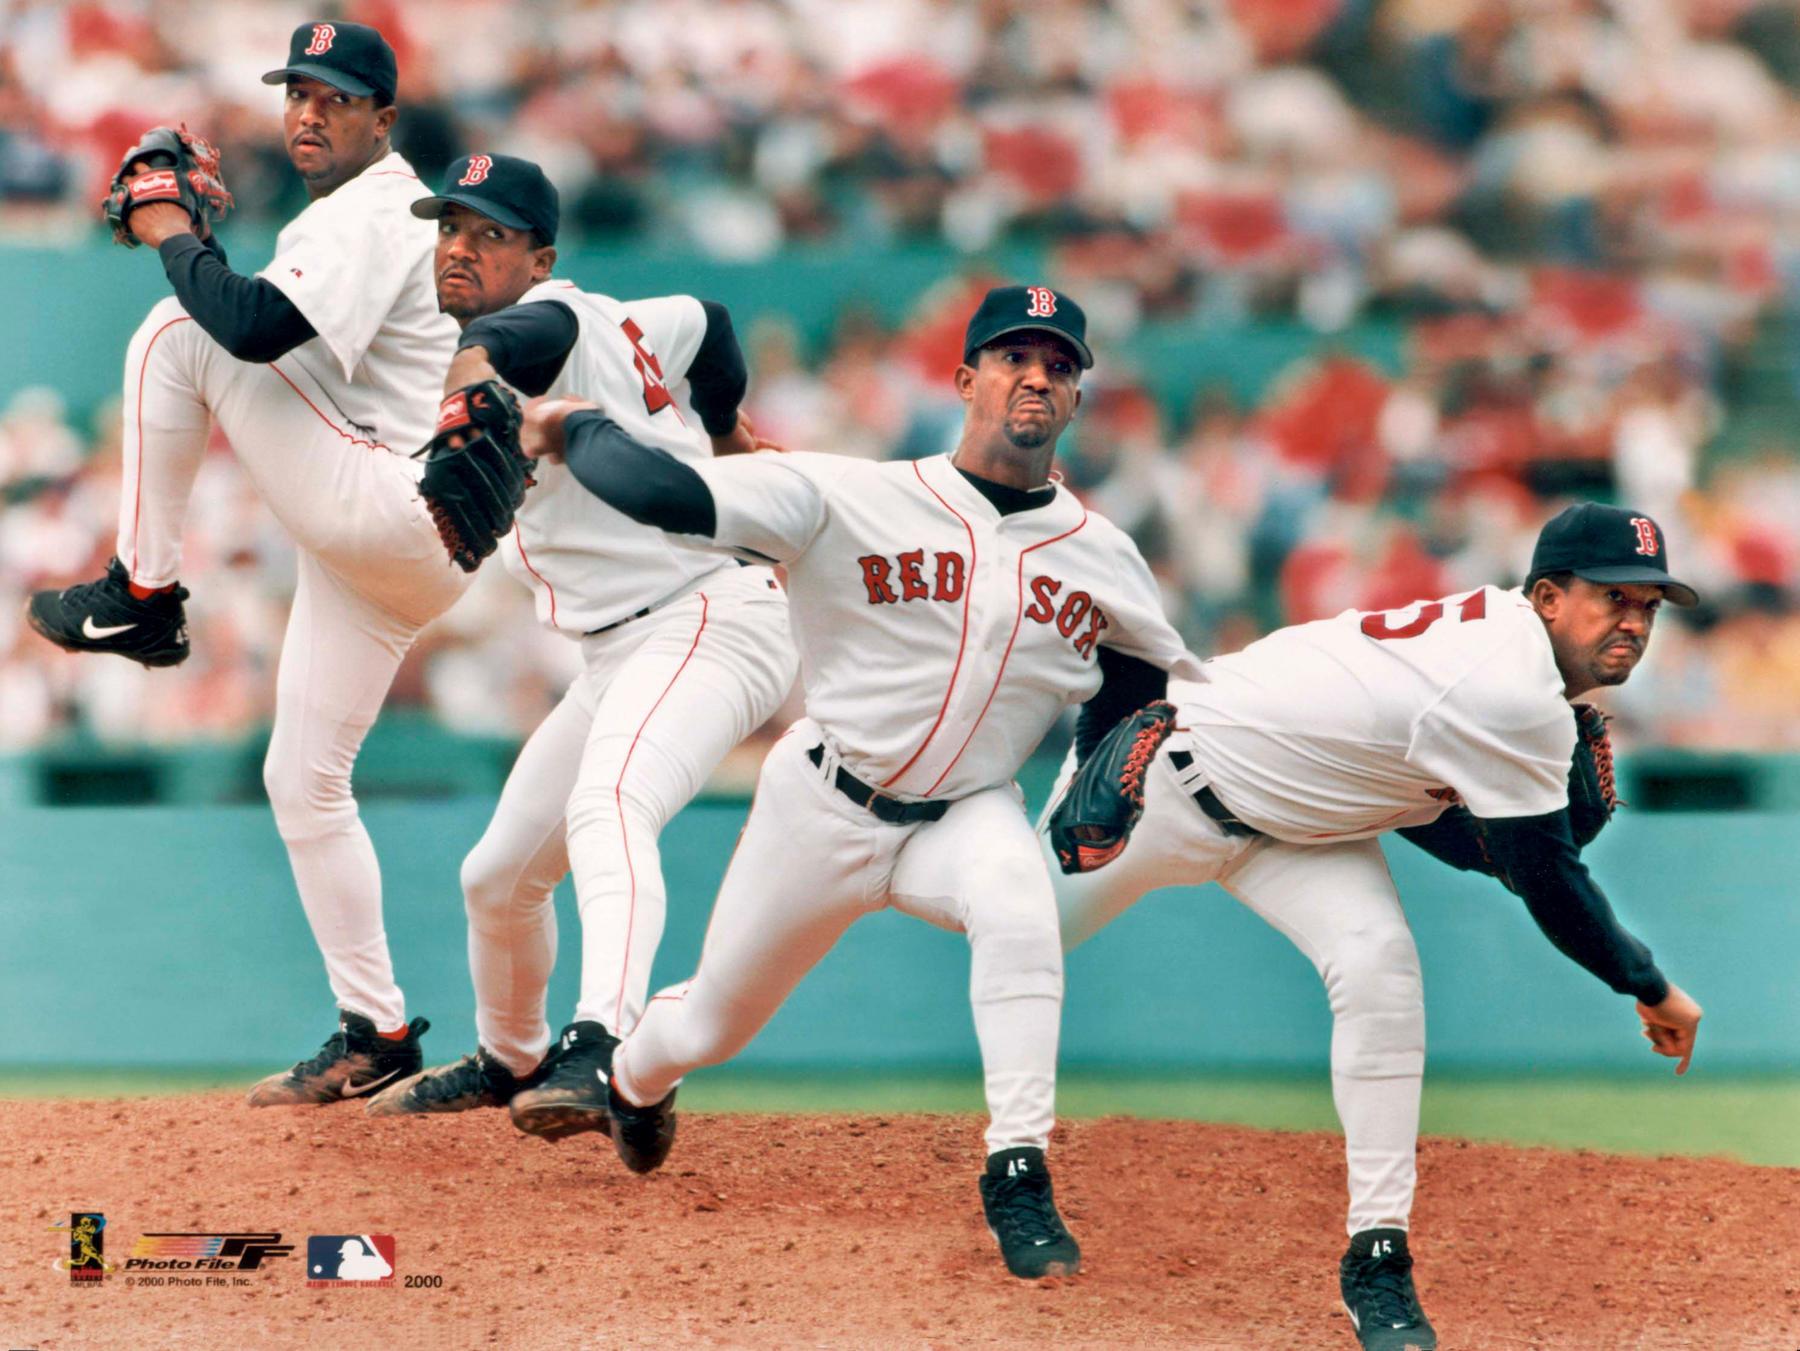 Pitcher Curt Schilling, of the Boston Red Sox, releases a pitch, during the  sixth inning of the 2nd game of the 2004 World Series, at Fenway Park on  October 24, 2004, in